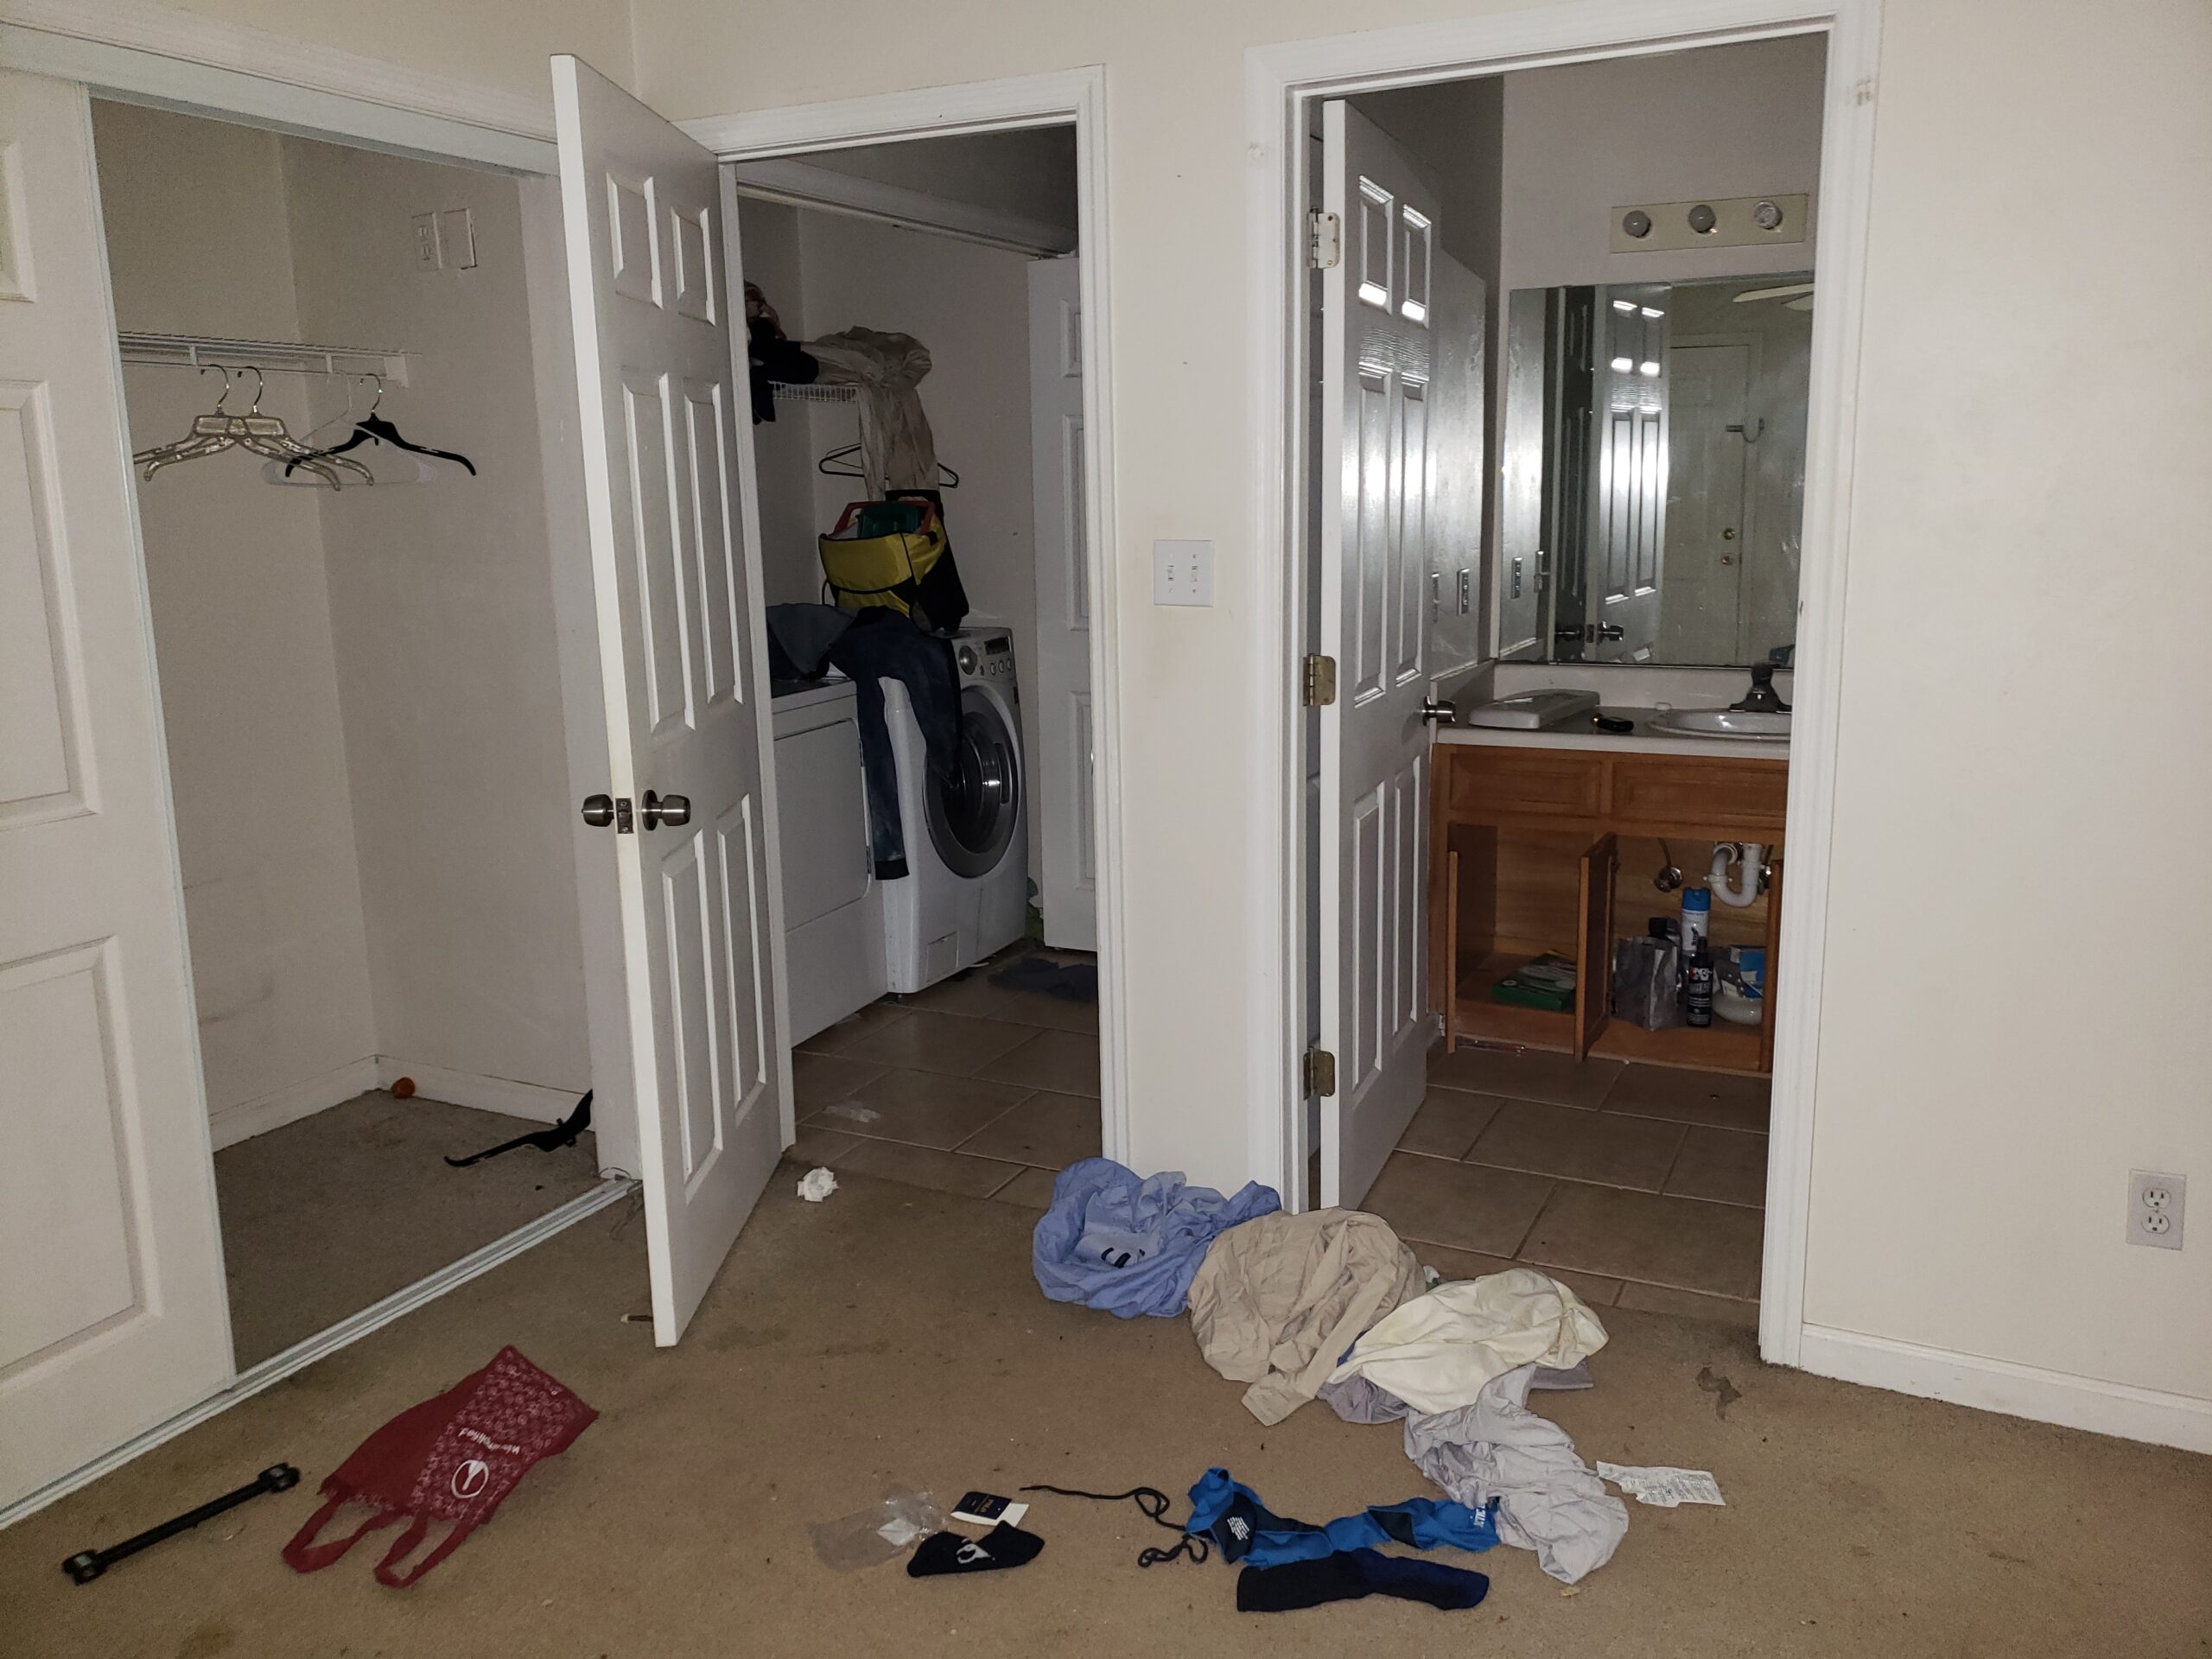 Photo is decorative. It shows a master bedroom with clothes and debris left on the floor and stuff piled on the washer dryer. Tallahassee Realtors should ask you to clean that up!